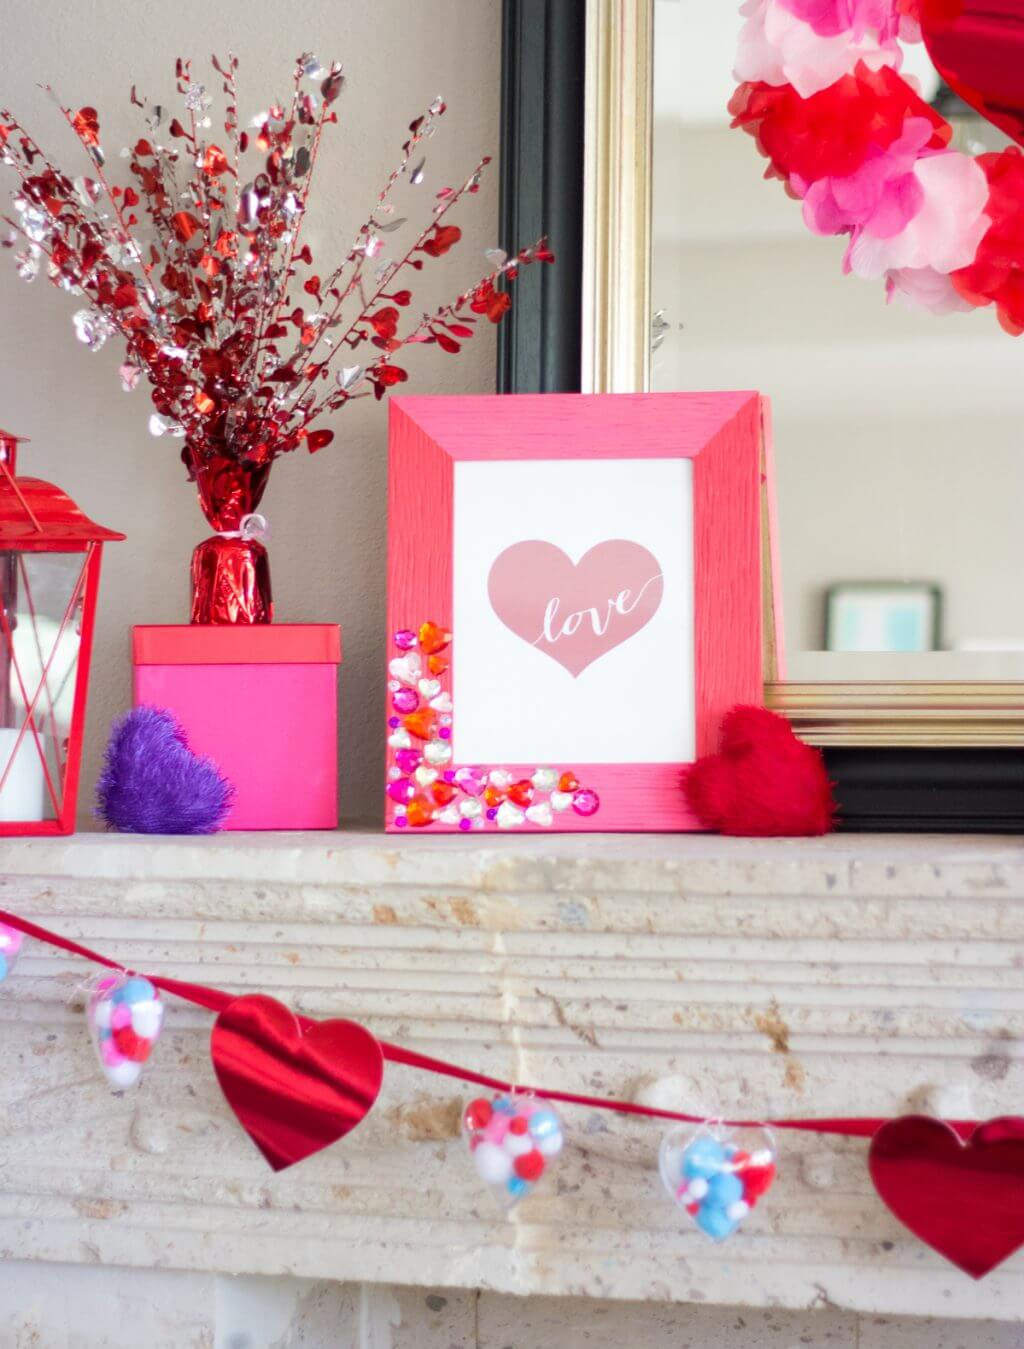 Good Valentines Day Gifts
 45 Homemade Valentines Day Gift Ideas For Him